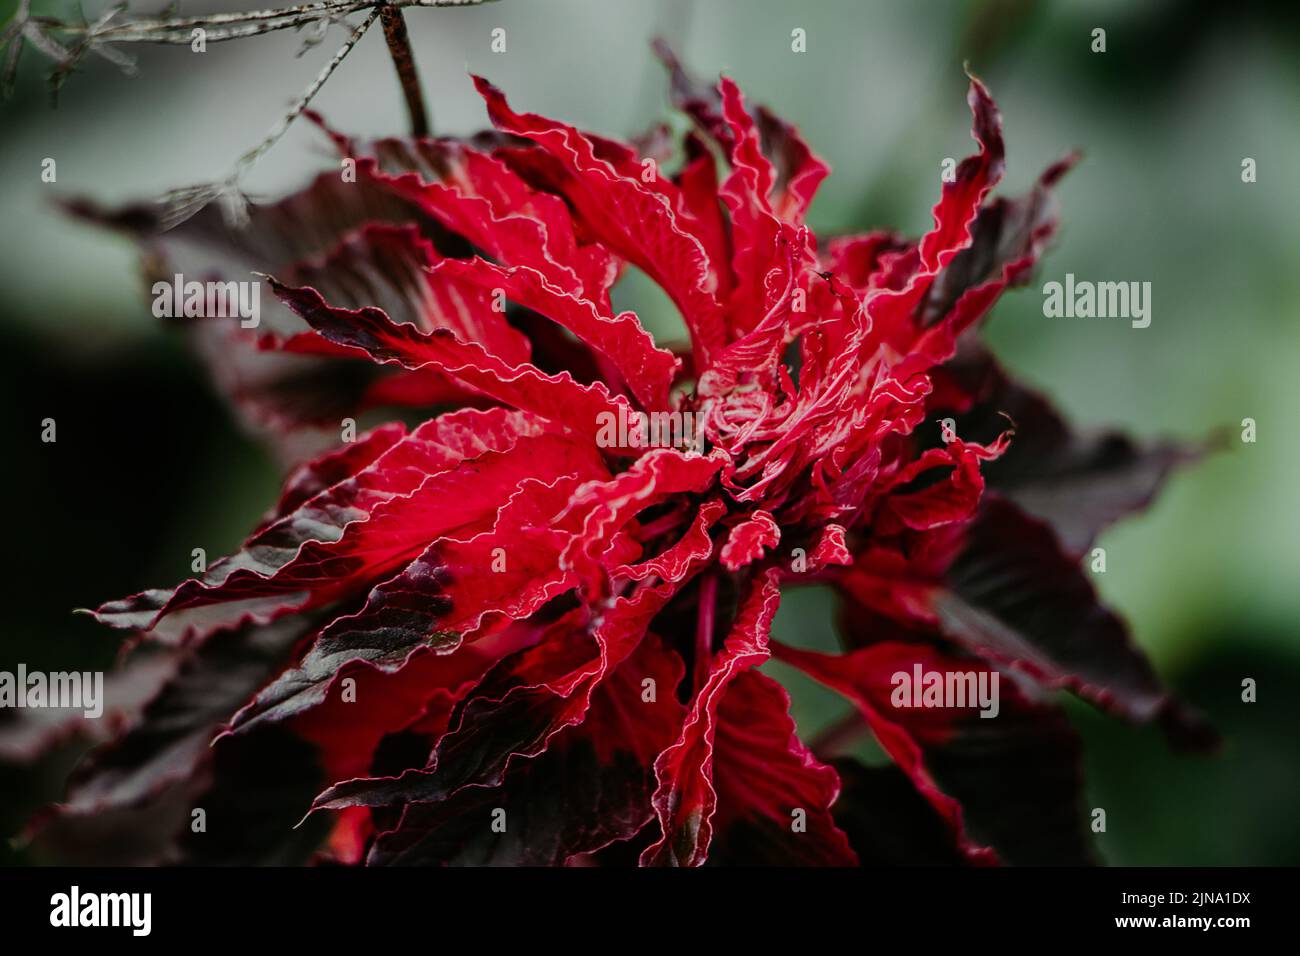 Ornamental plant Amaranthus tricolor. Beautiful red autumn flower in garden. Growing decorative flowers. Stock Photo